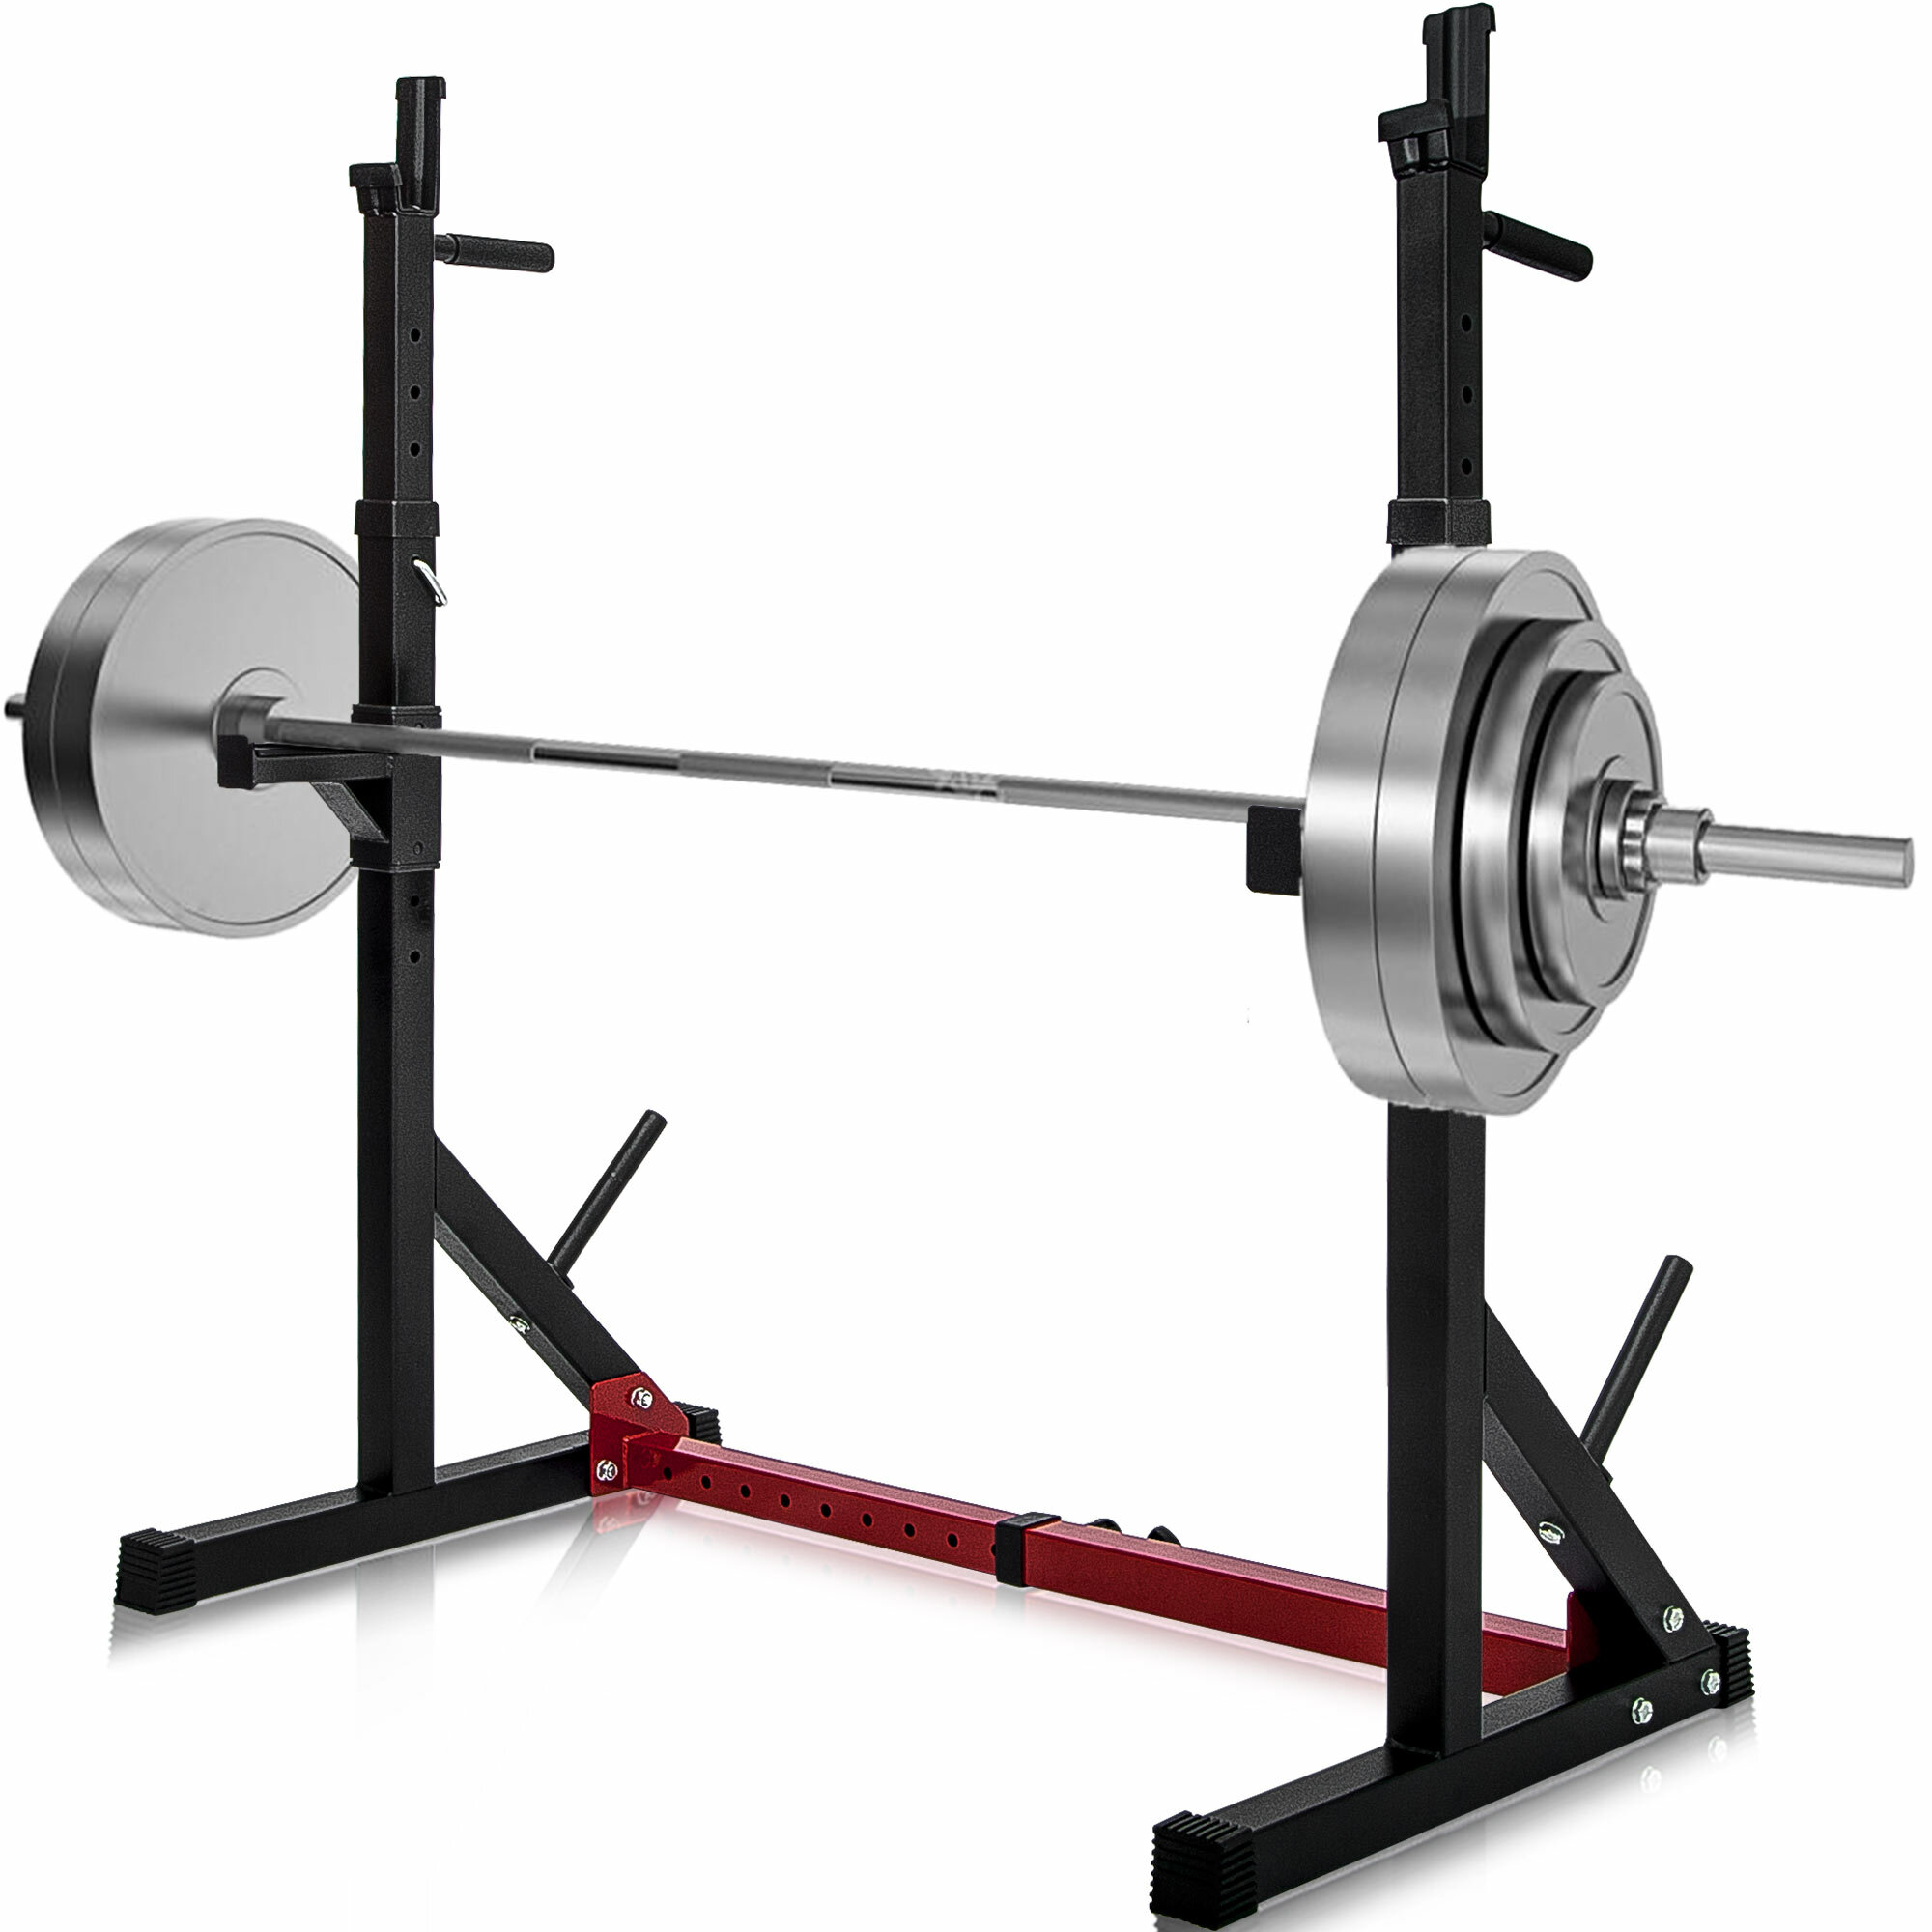 Image of [US Direct] Dipping Station 435~675inch High 13 Levels Adjustable Weight Lifting Bench Barbell Stand Fitness Gym Home